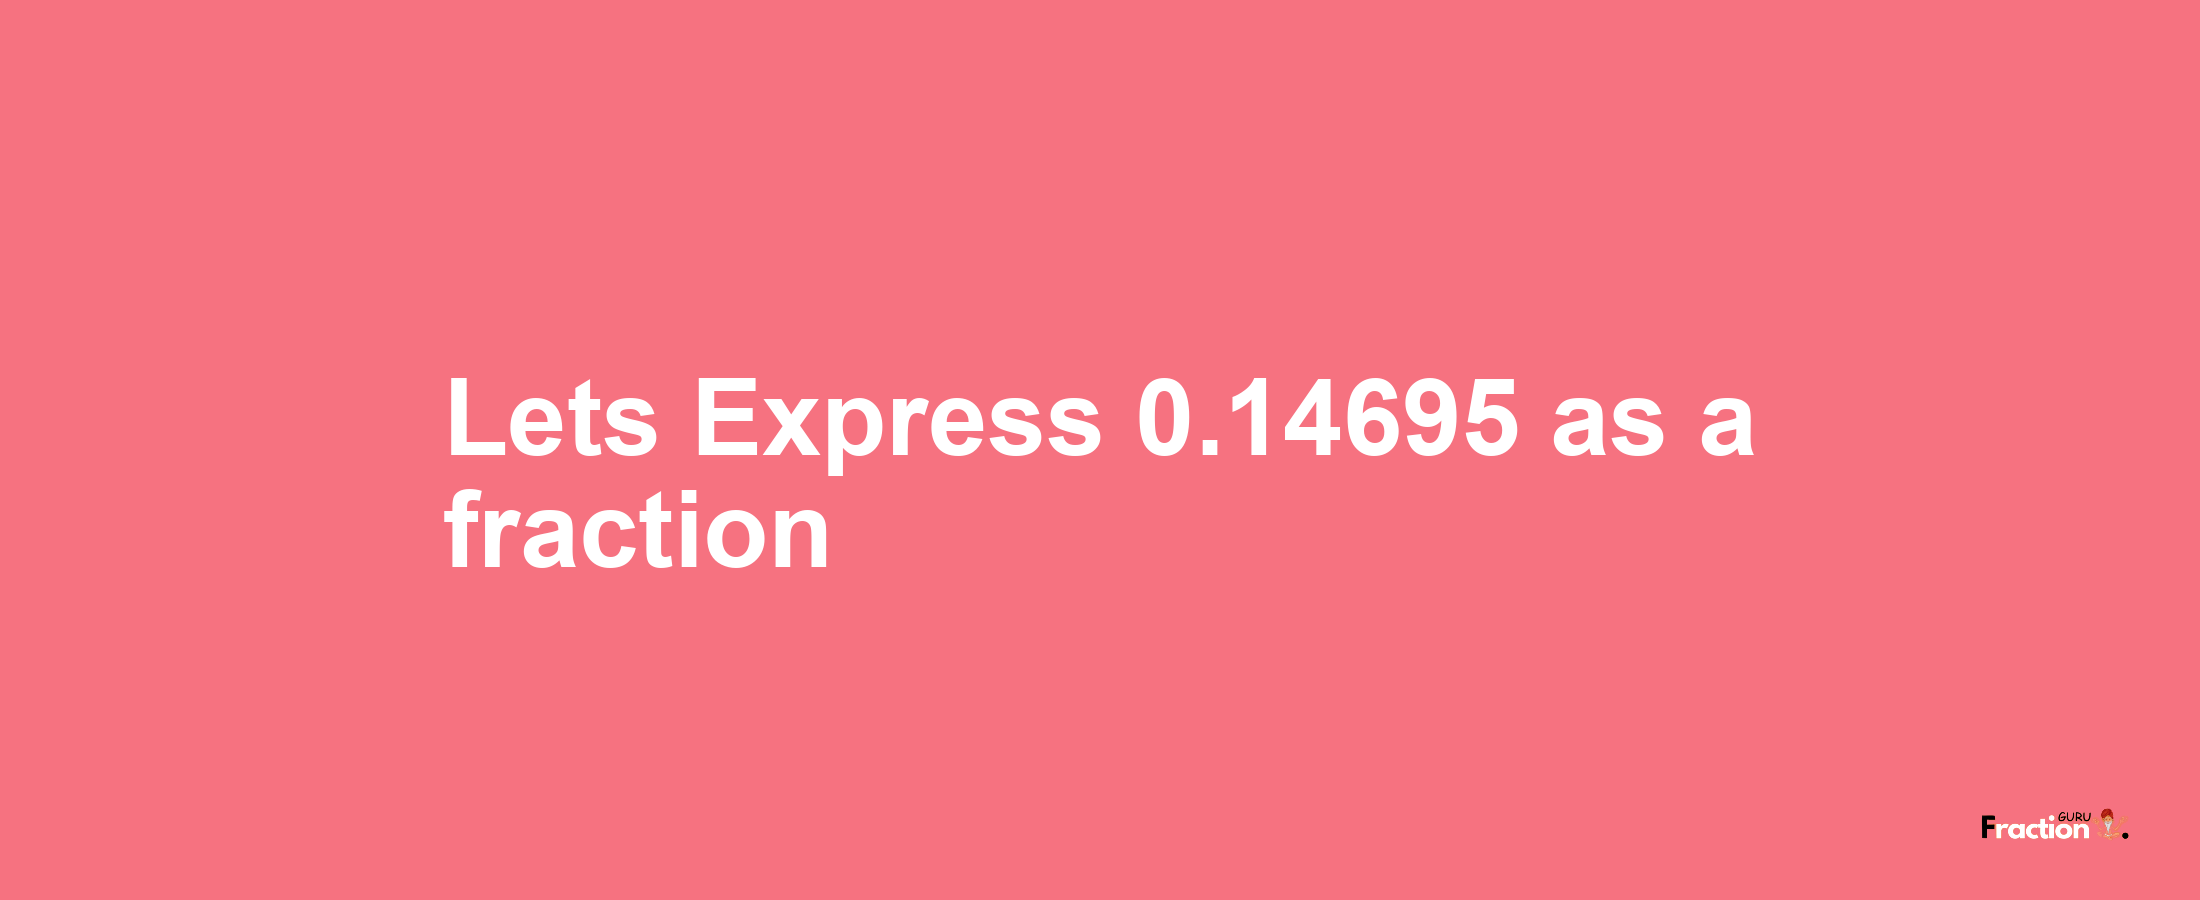 Lets Express 0.14695 as afraction